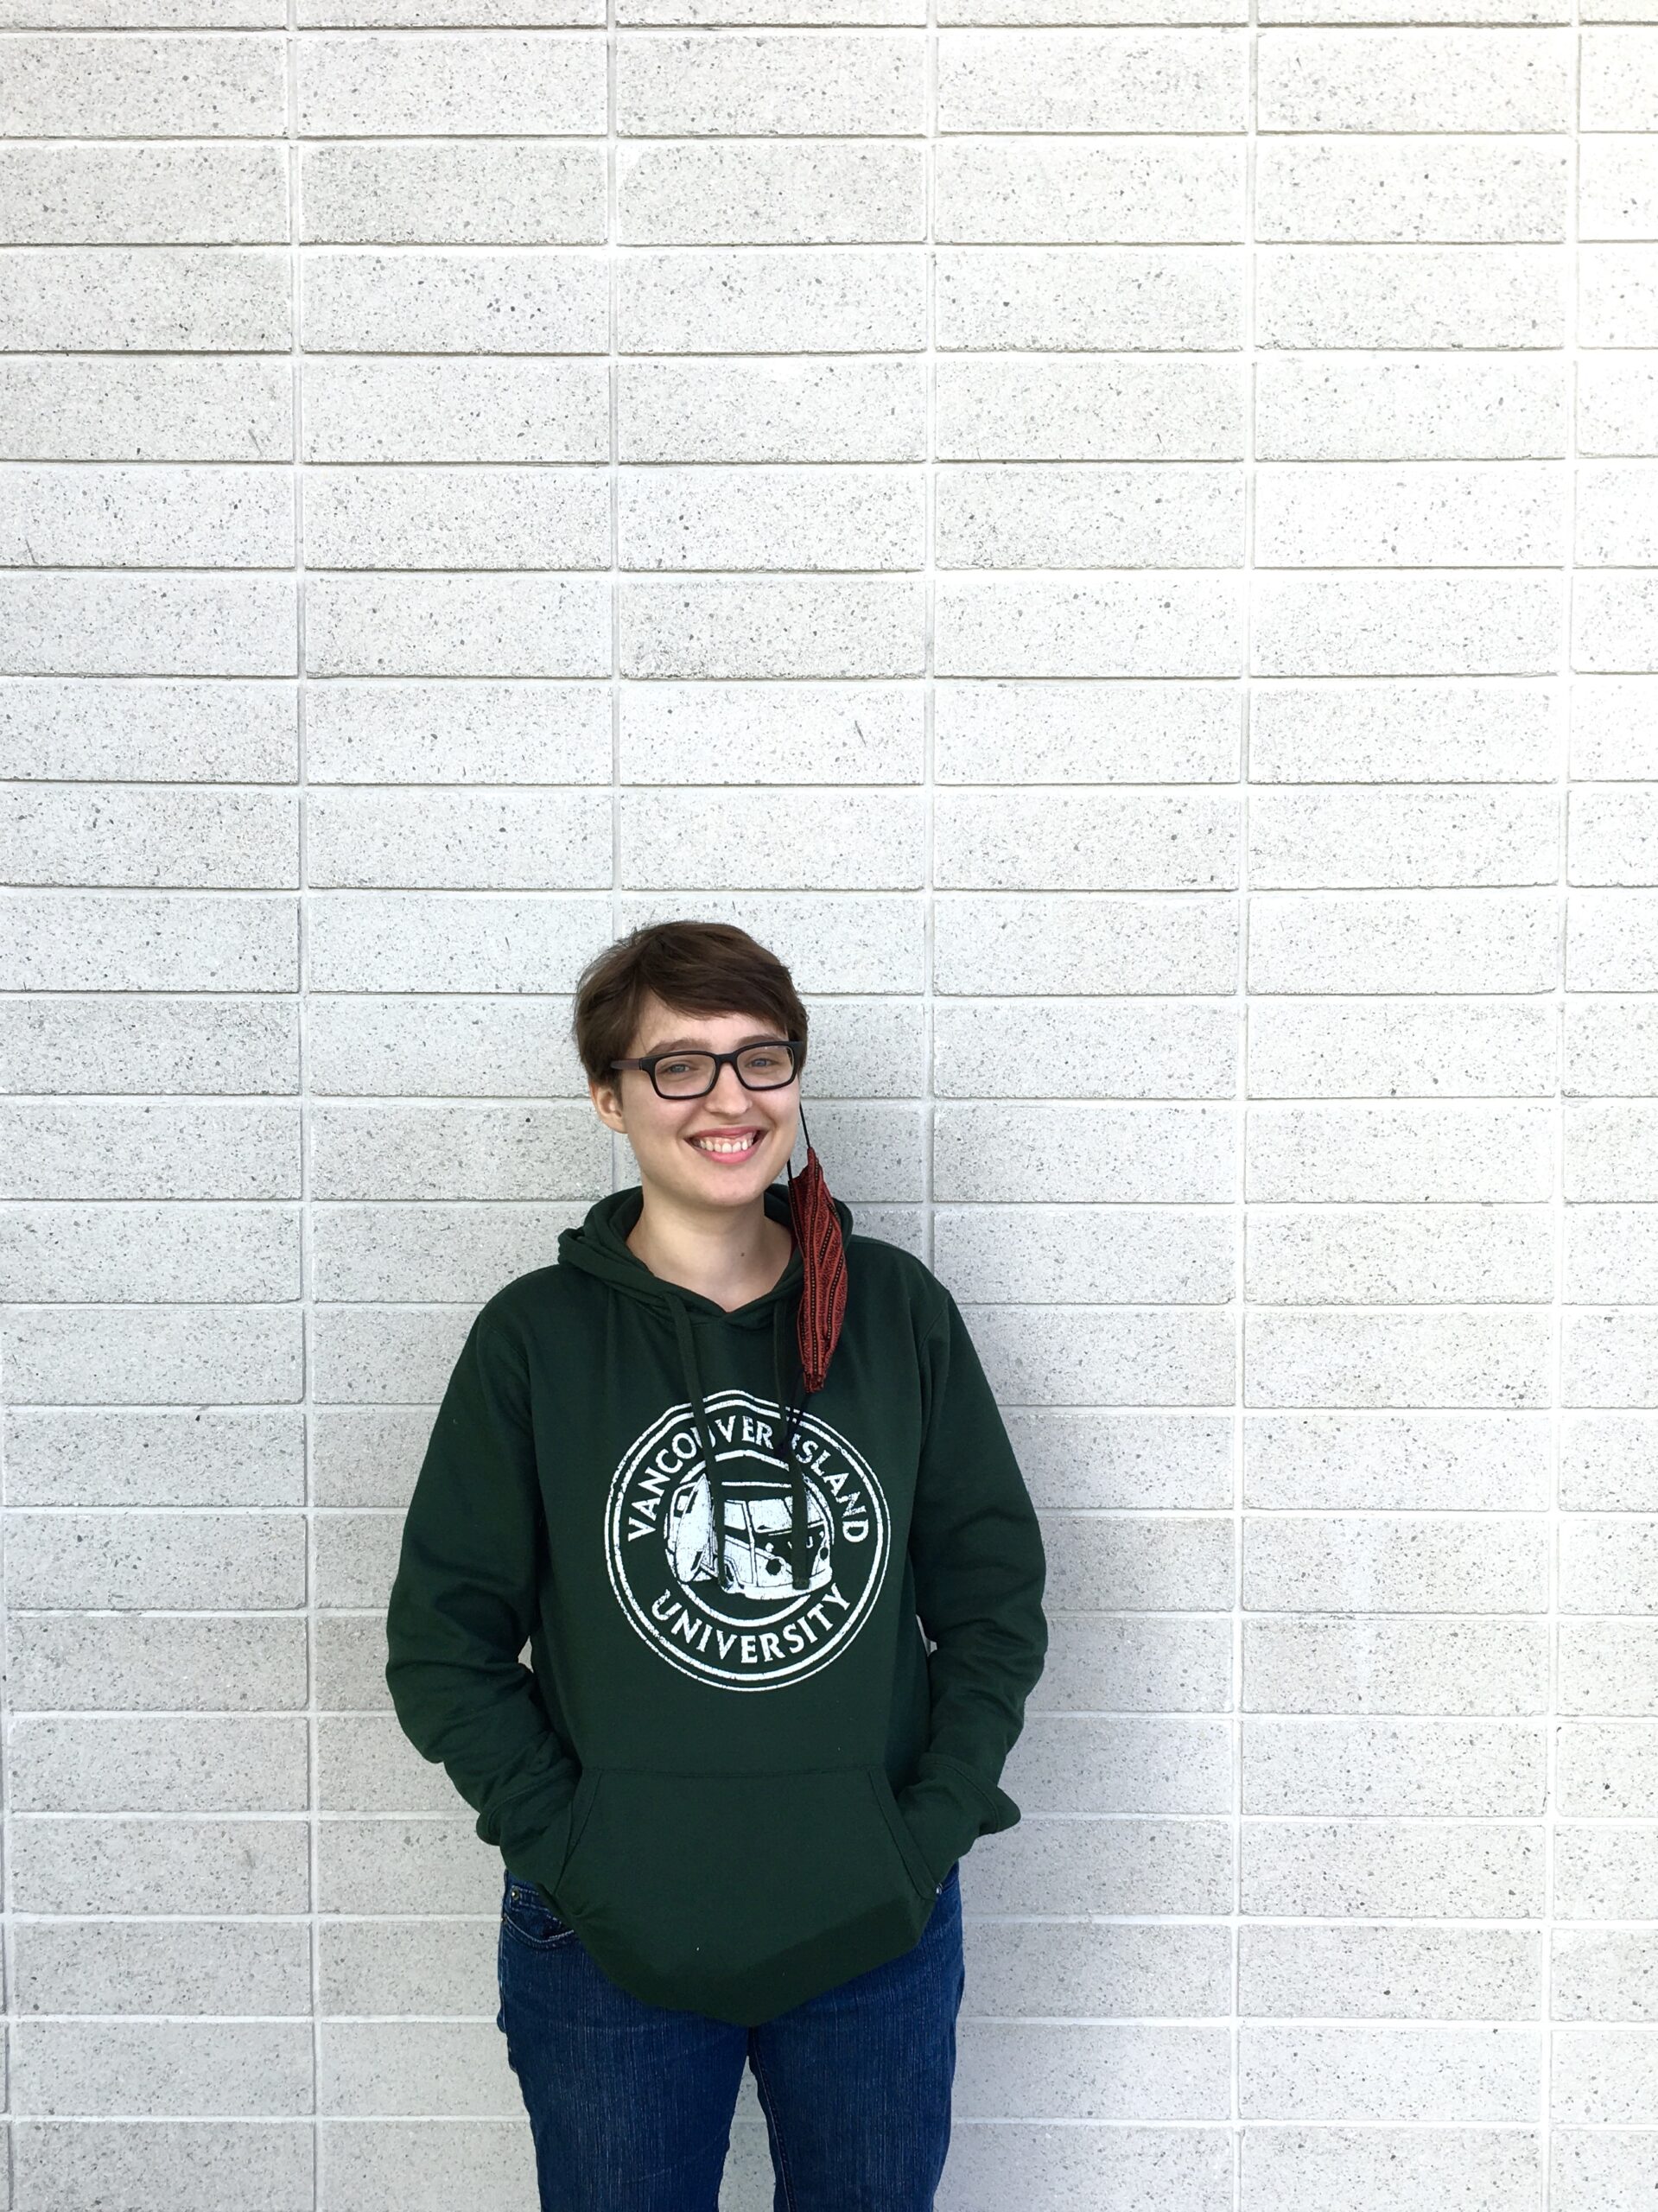 A woman in a green sweater smiles standing in front of a grey brick wall, she has a mask hanging from her left ear